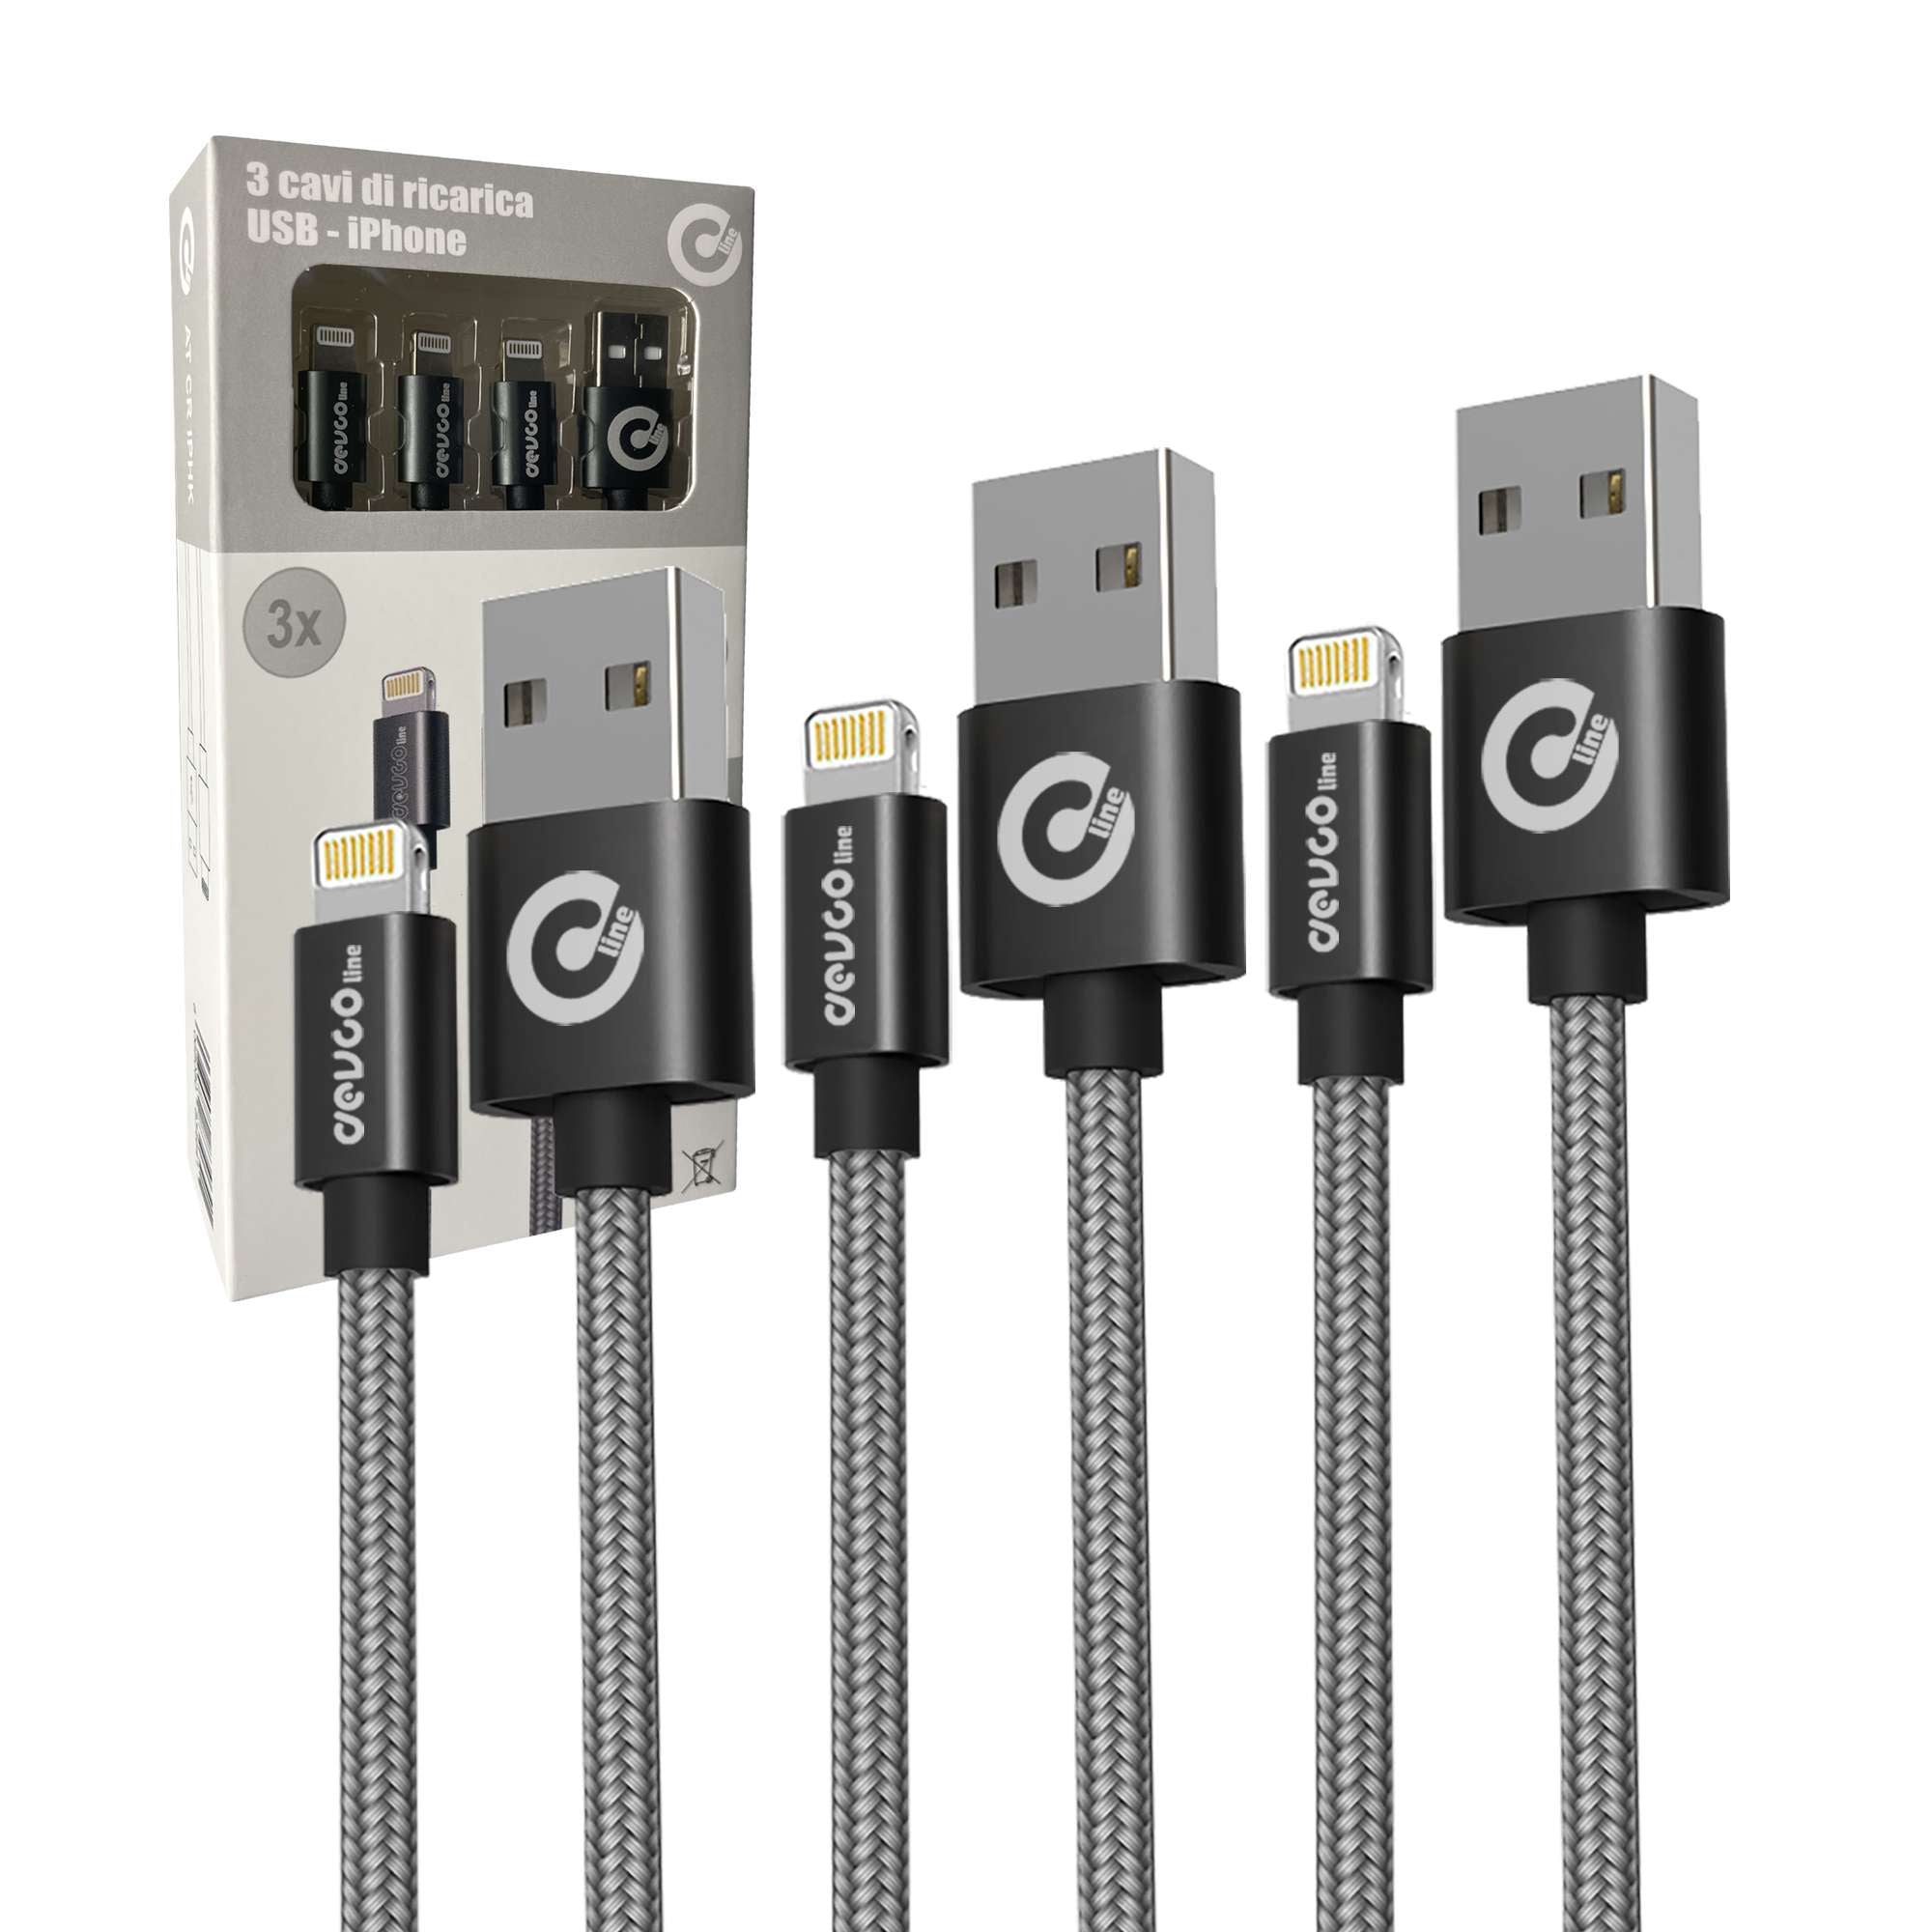 Kit set of 3 USB cables compatible with iPhone [1m, 2m, 3m] USB-A connection